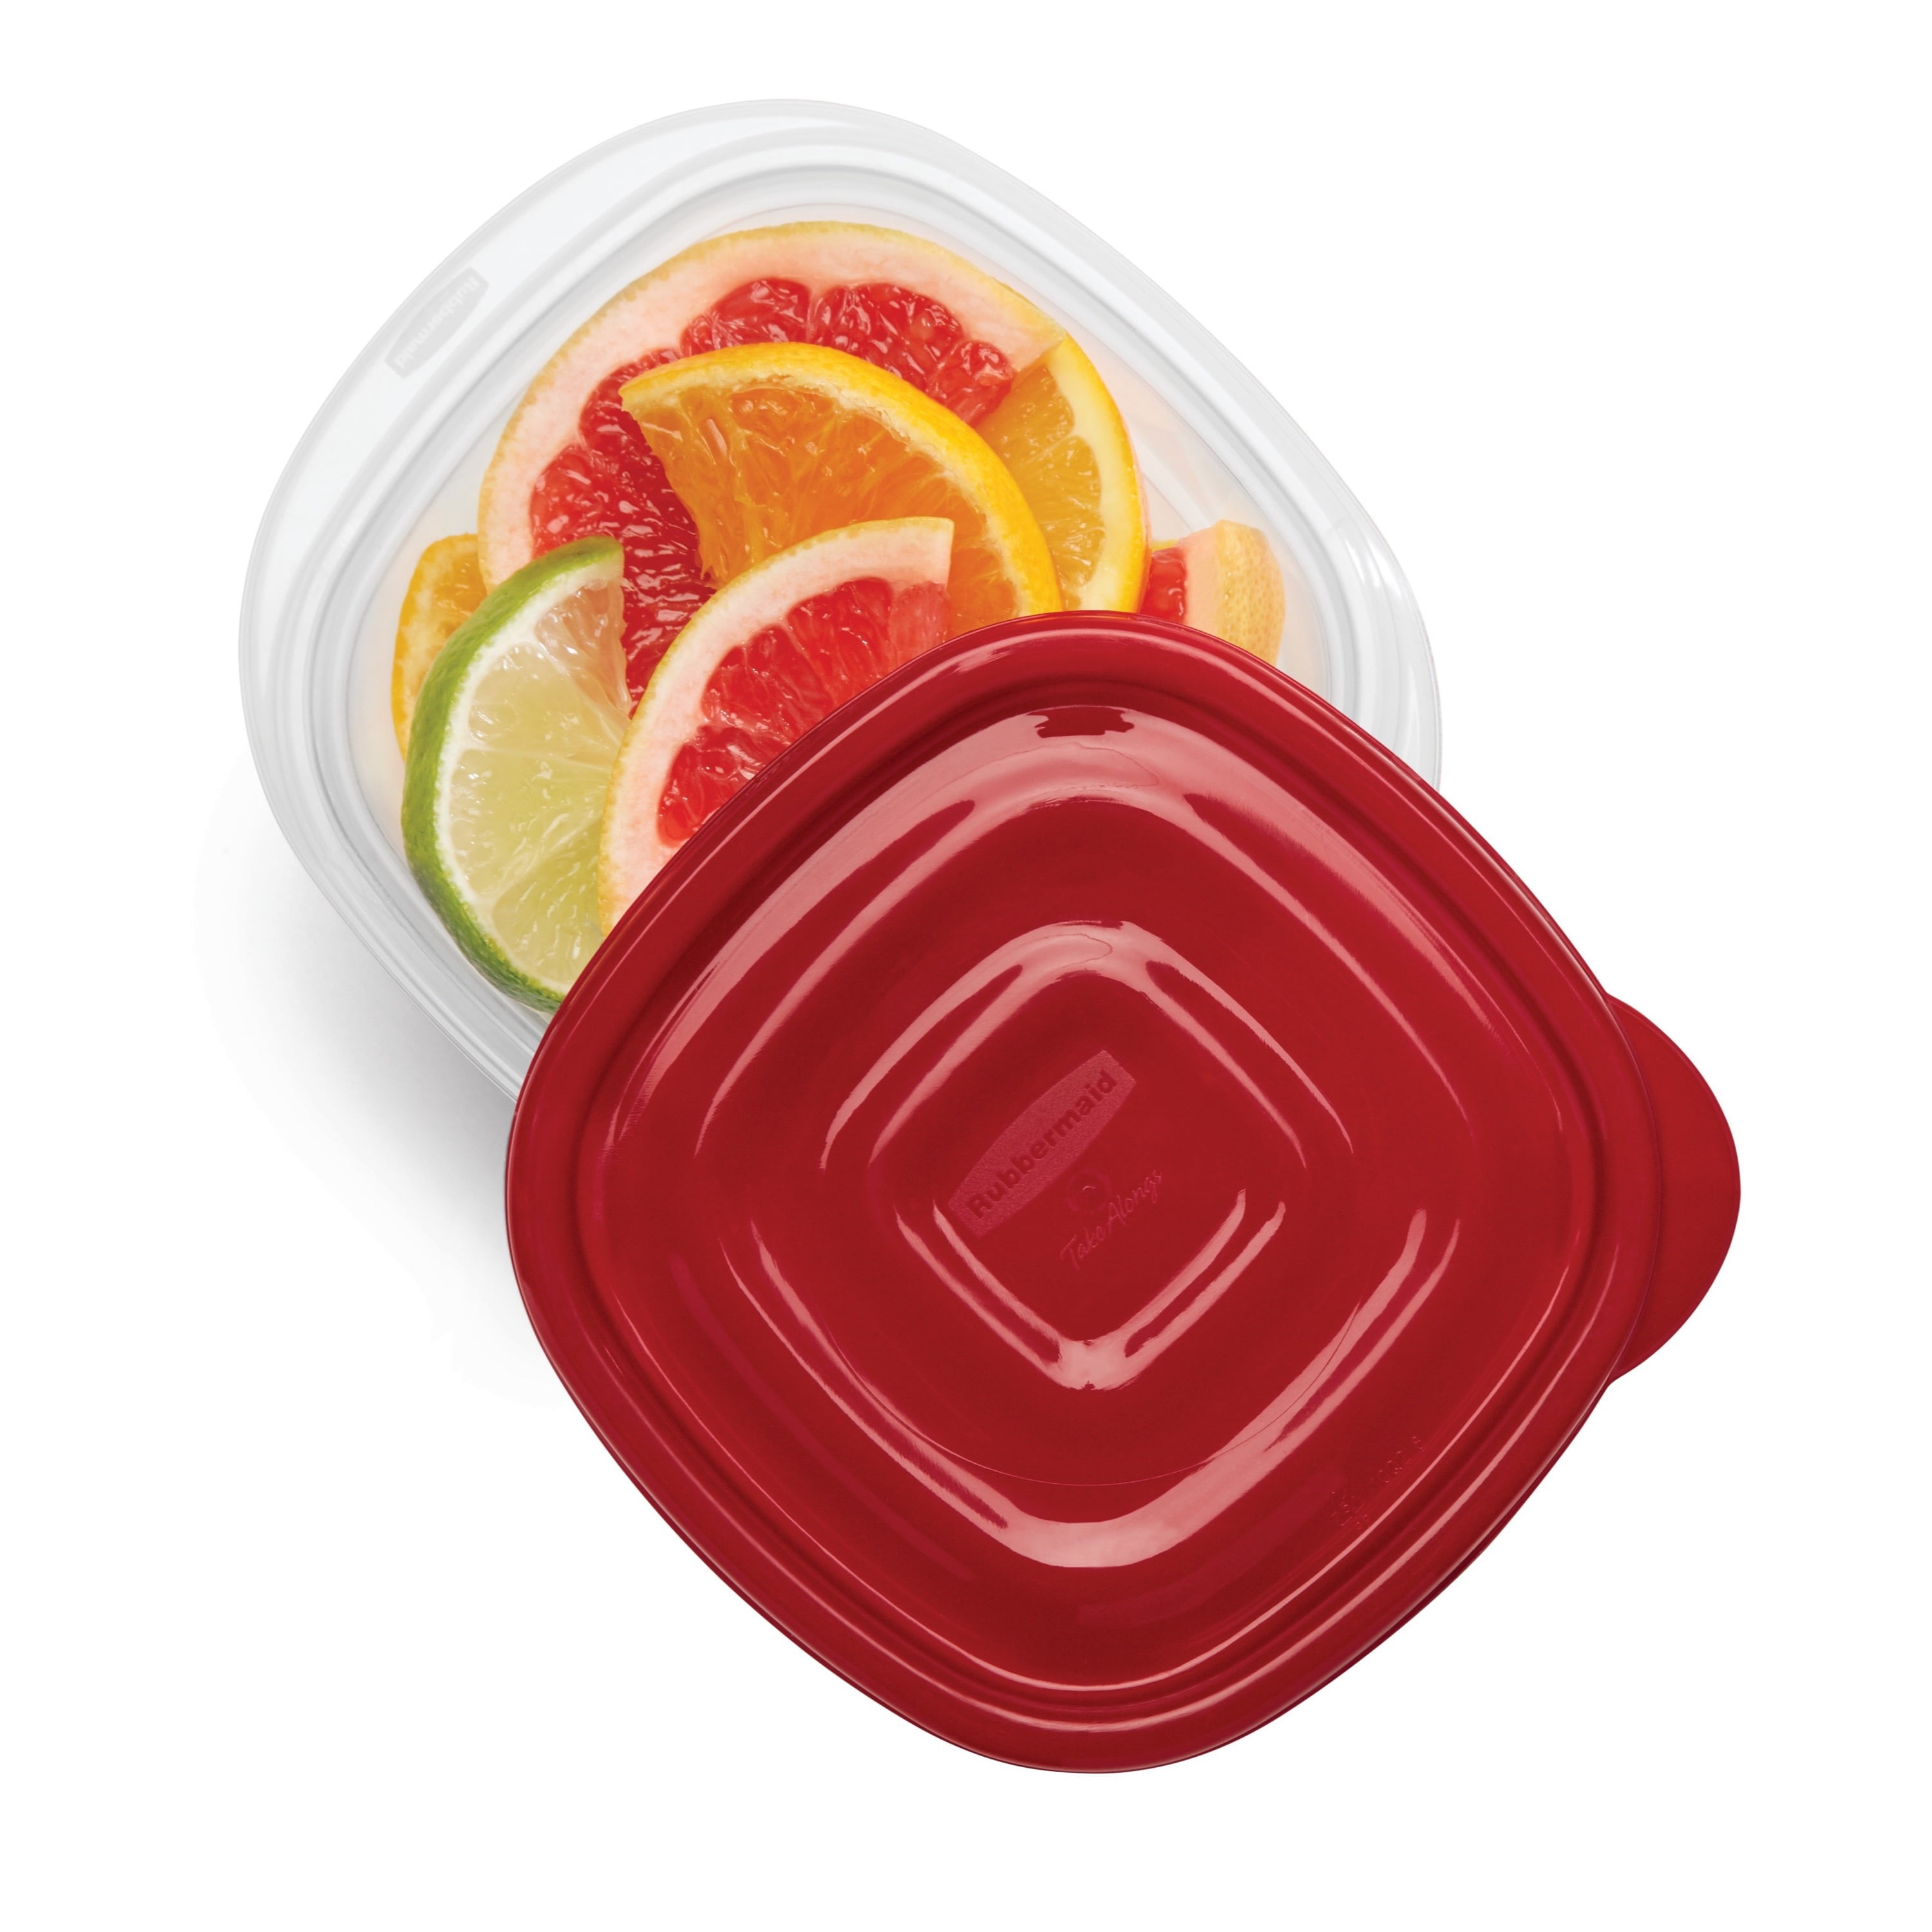 Rubbermaid TakeAlongs 5.2 C. Clear Square Food Storage Container with Lids  (4-Pack) - Dazey's Supply